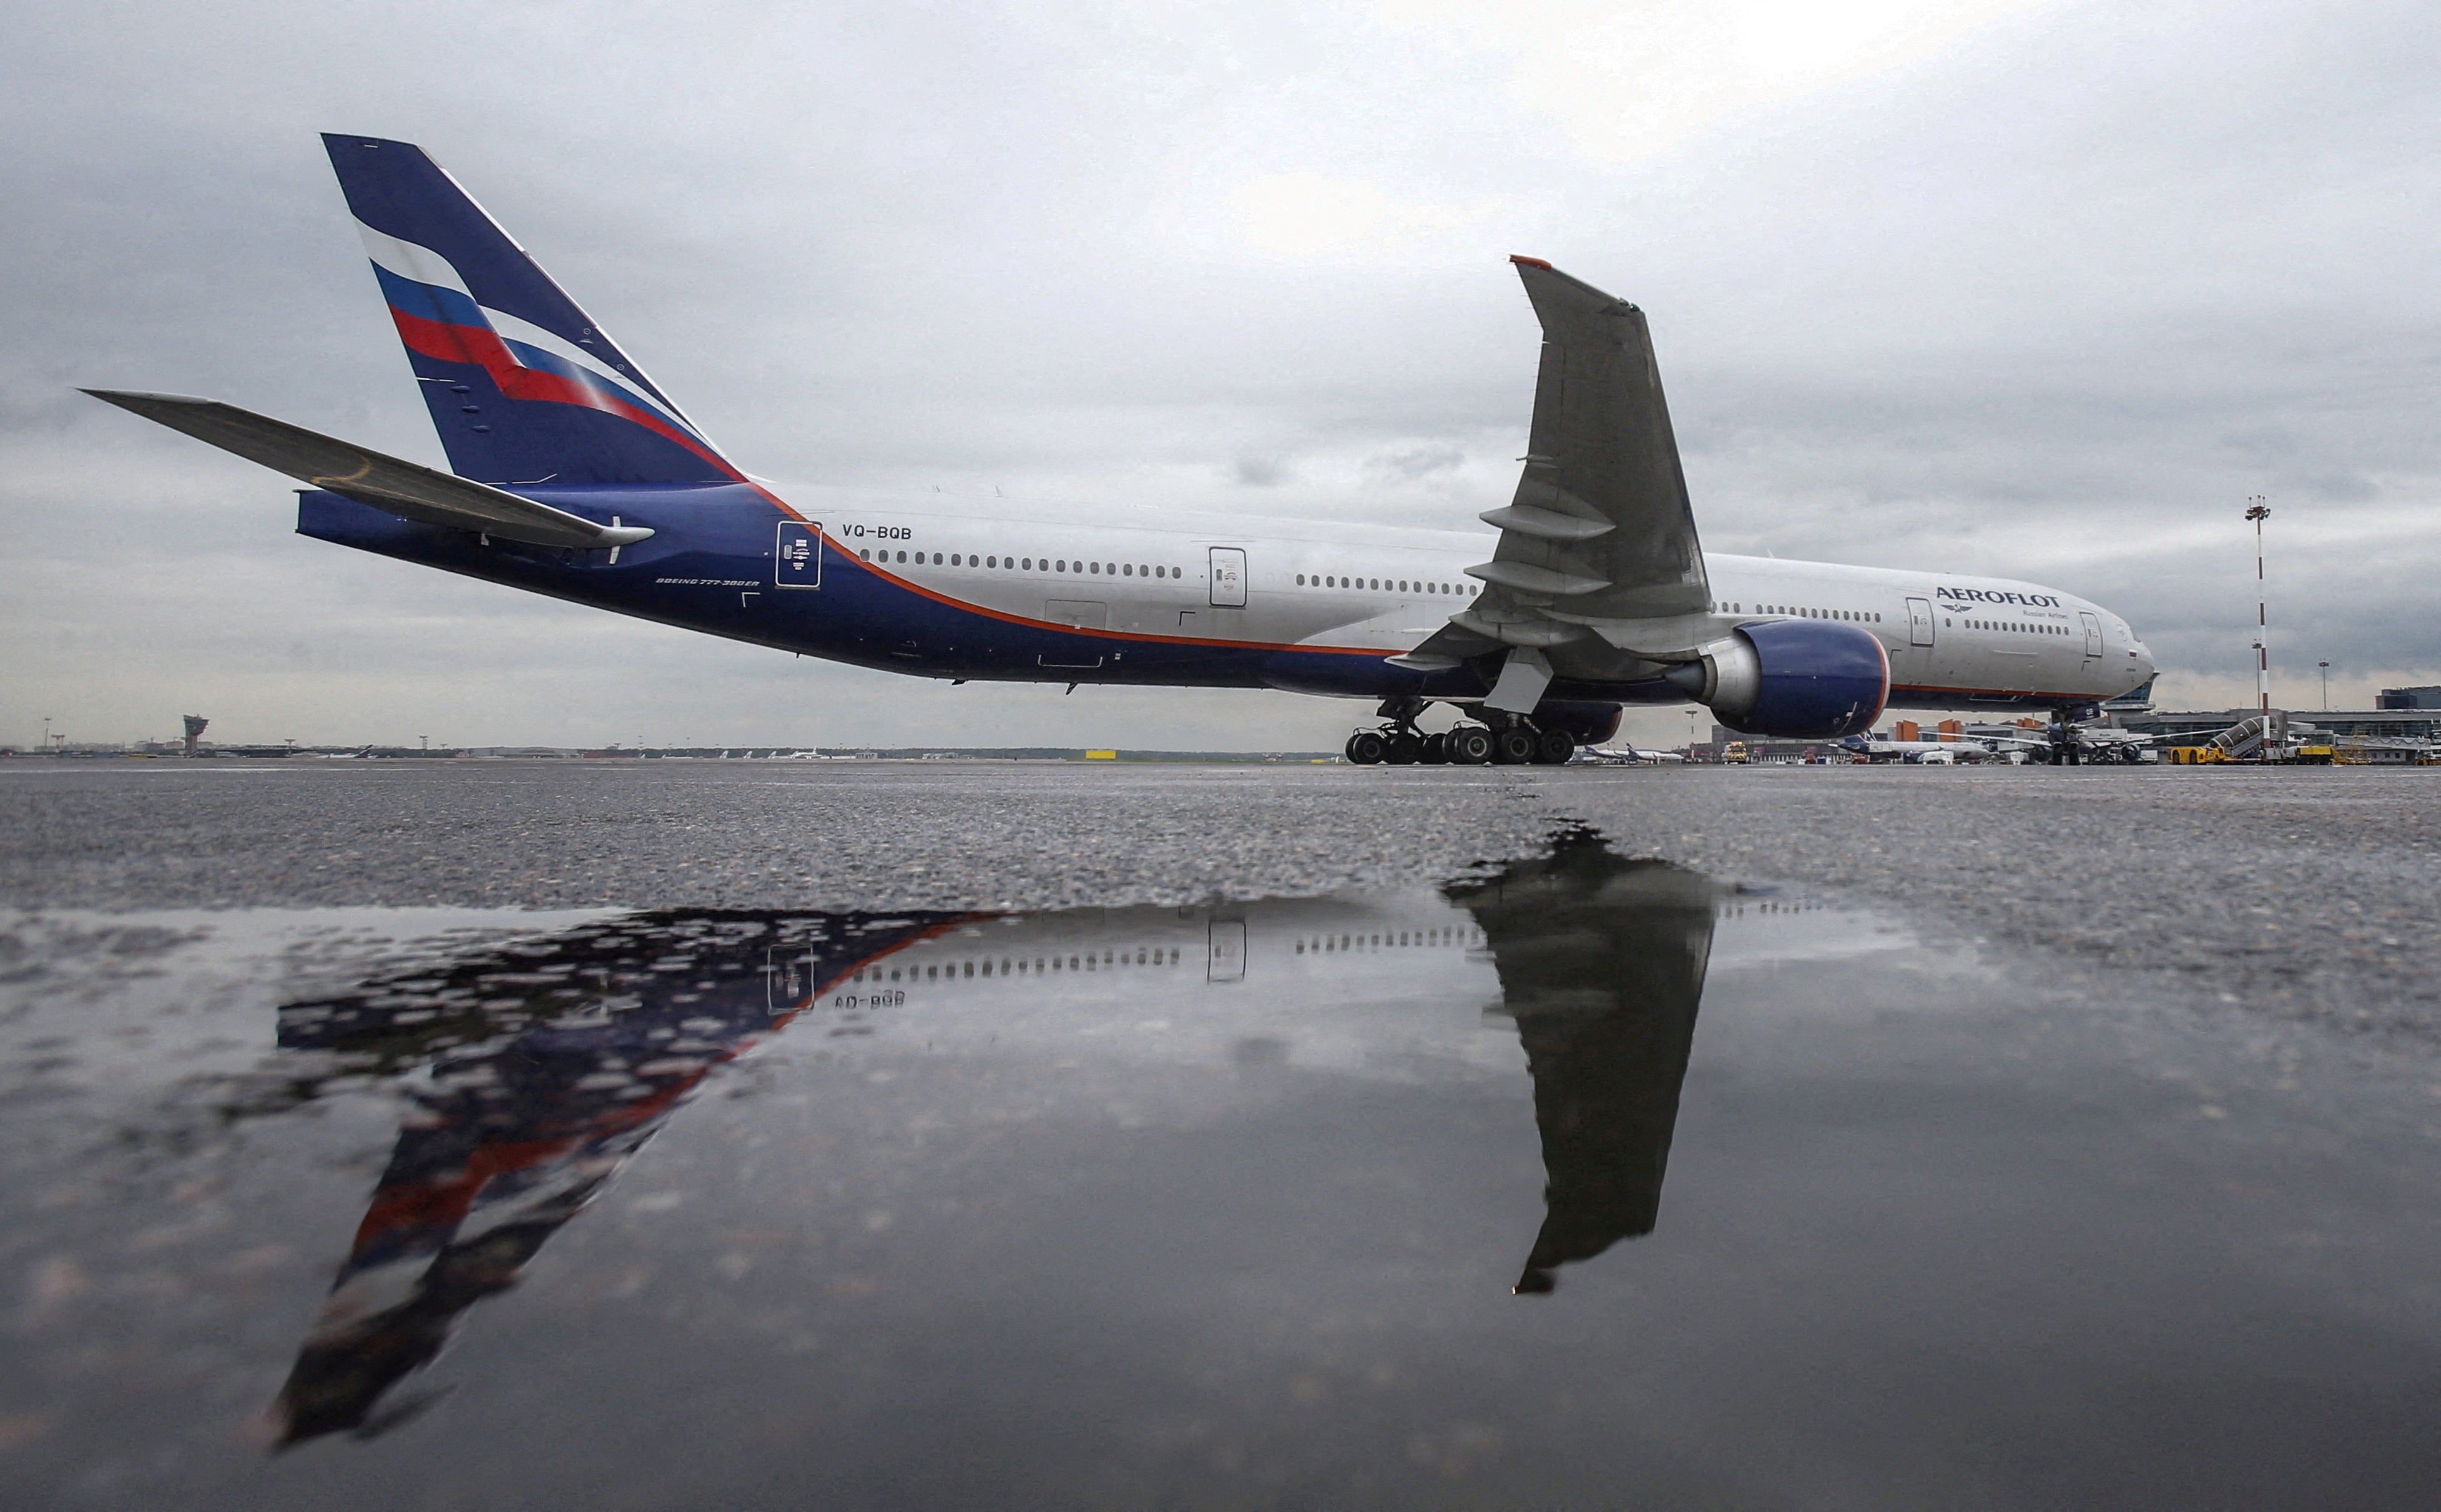 An Aeroflot Boeing 777-300ER aircraft parked at Sheremetyevo International Airport in Moscow